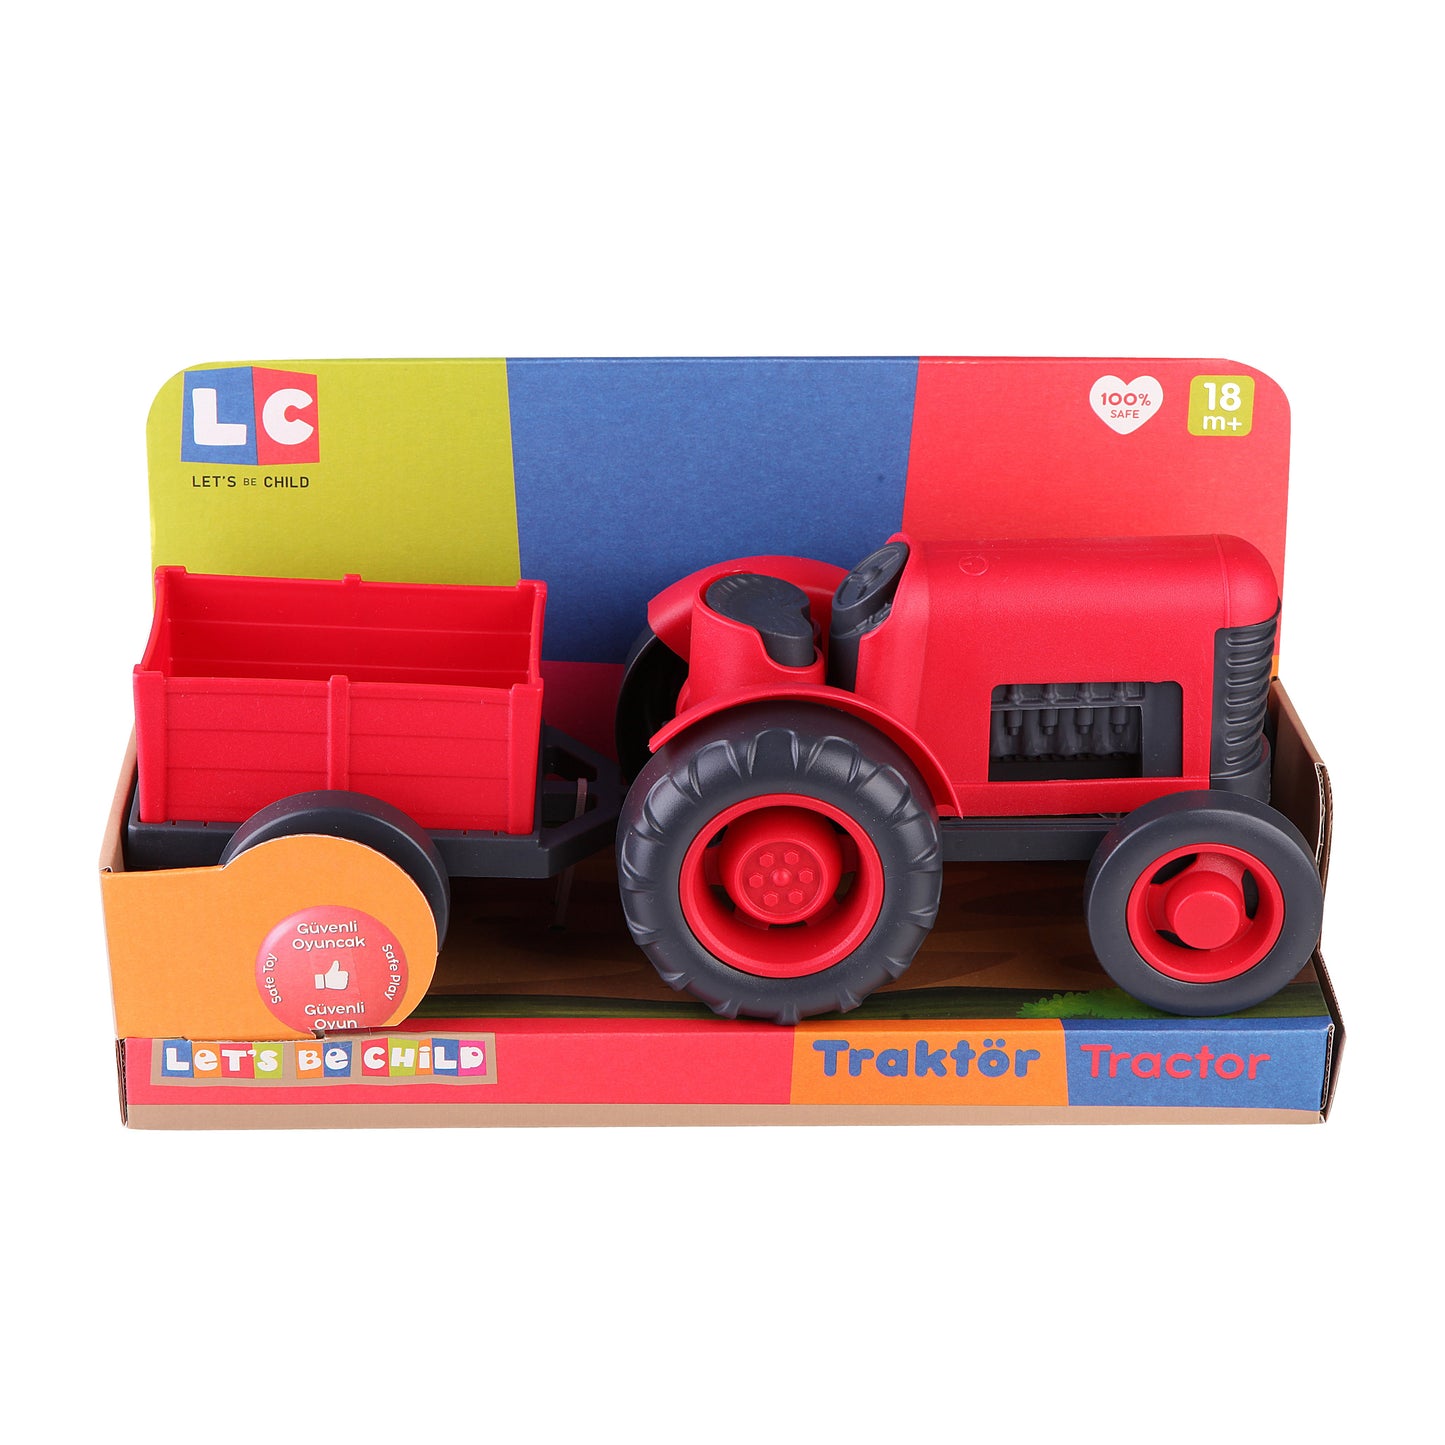 Red Tractor with Wagon